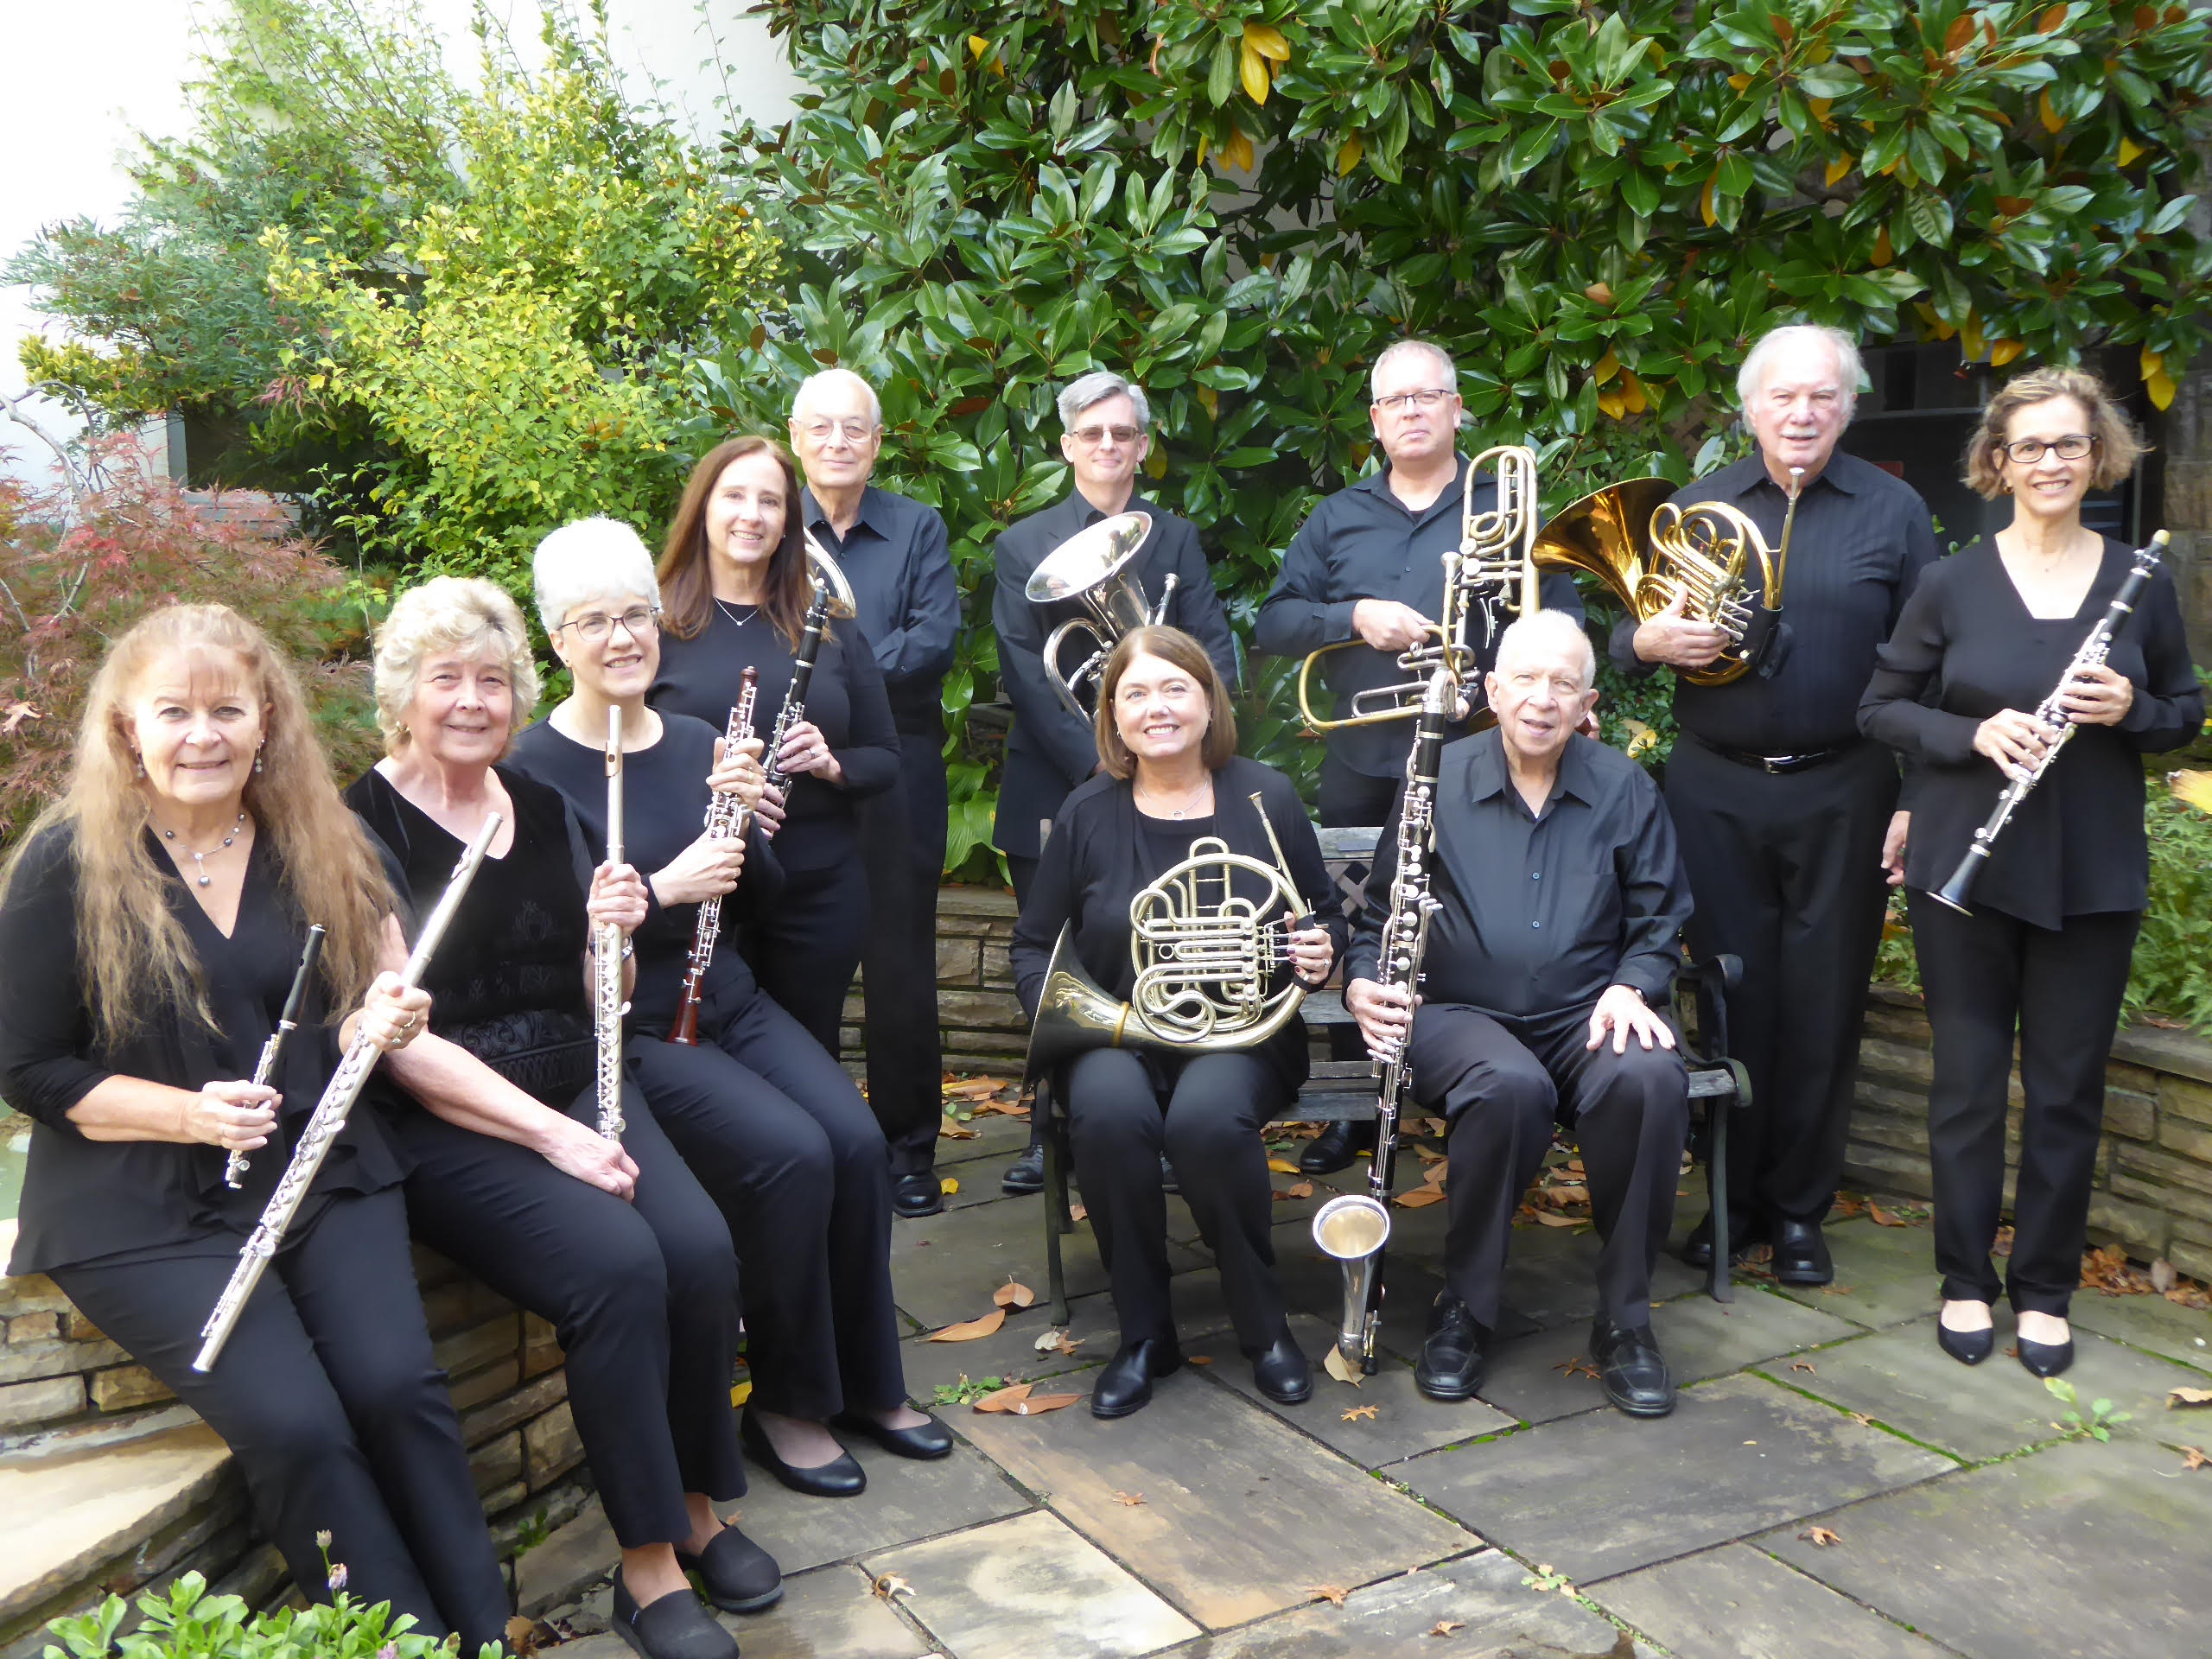 A color photograph of members of the Island Winds Ensemble holding their instruments.